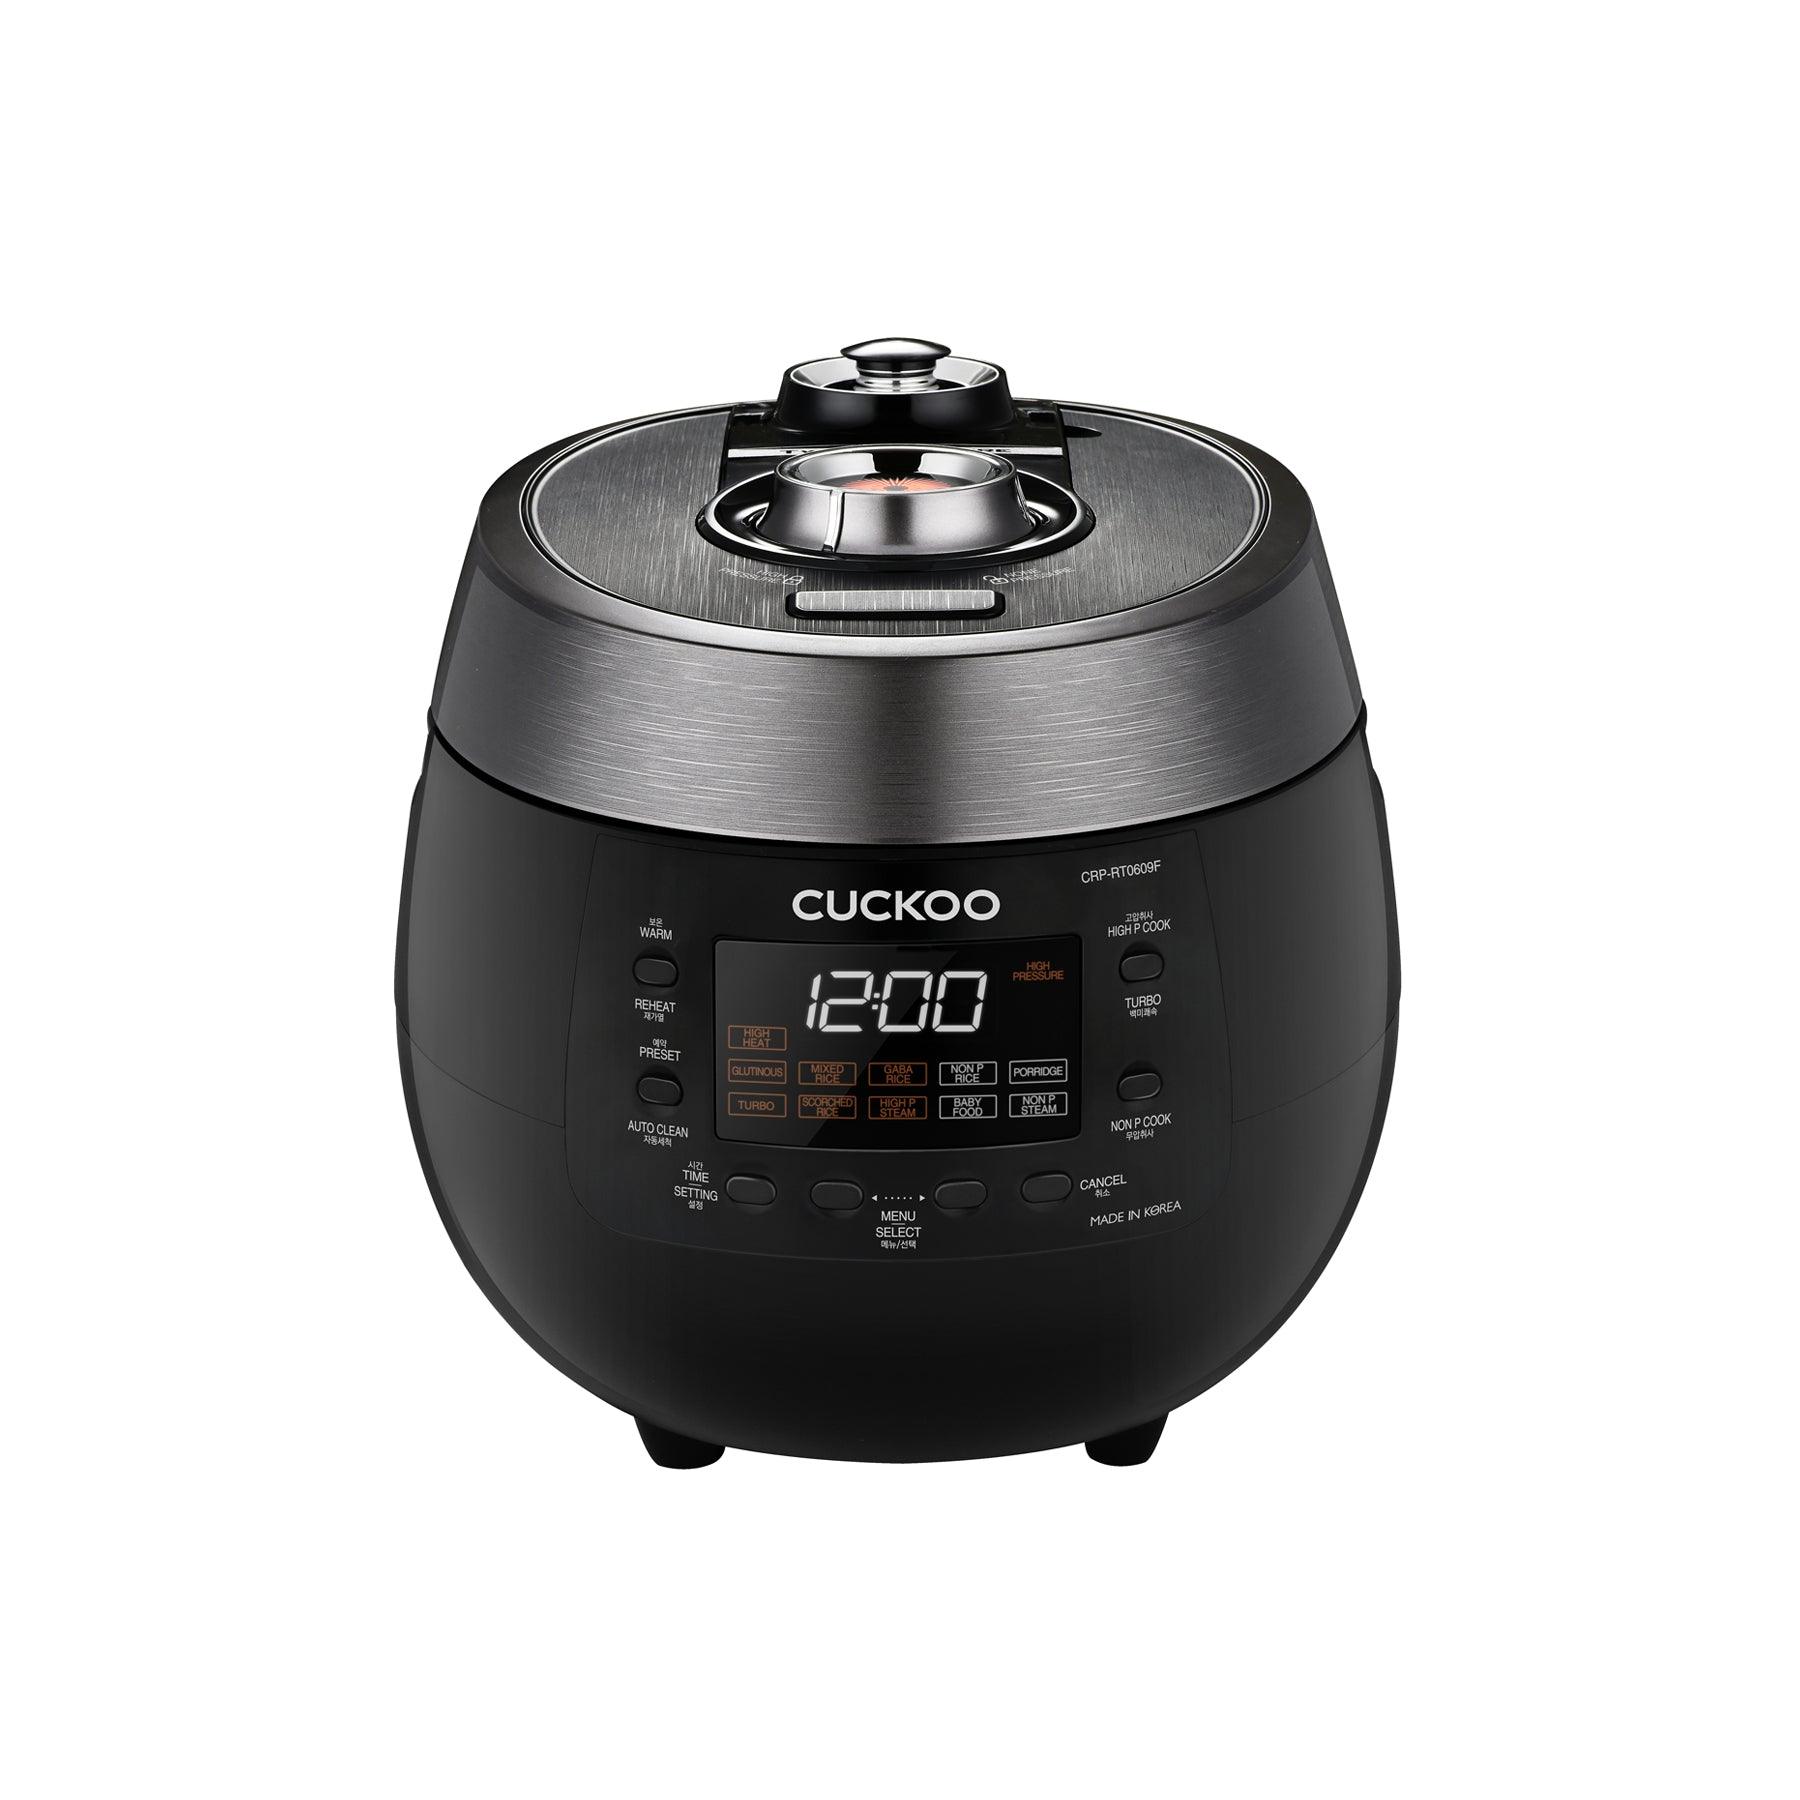 CUCKOO CRP-EHSS0309FG, Induction Heating Pressure Rice Cooker, 15 Menu  Options, Auto-Clean, Voice Guide, Made in Korea